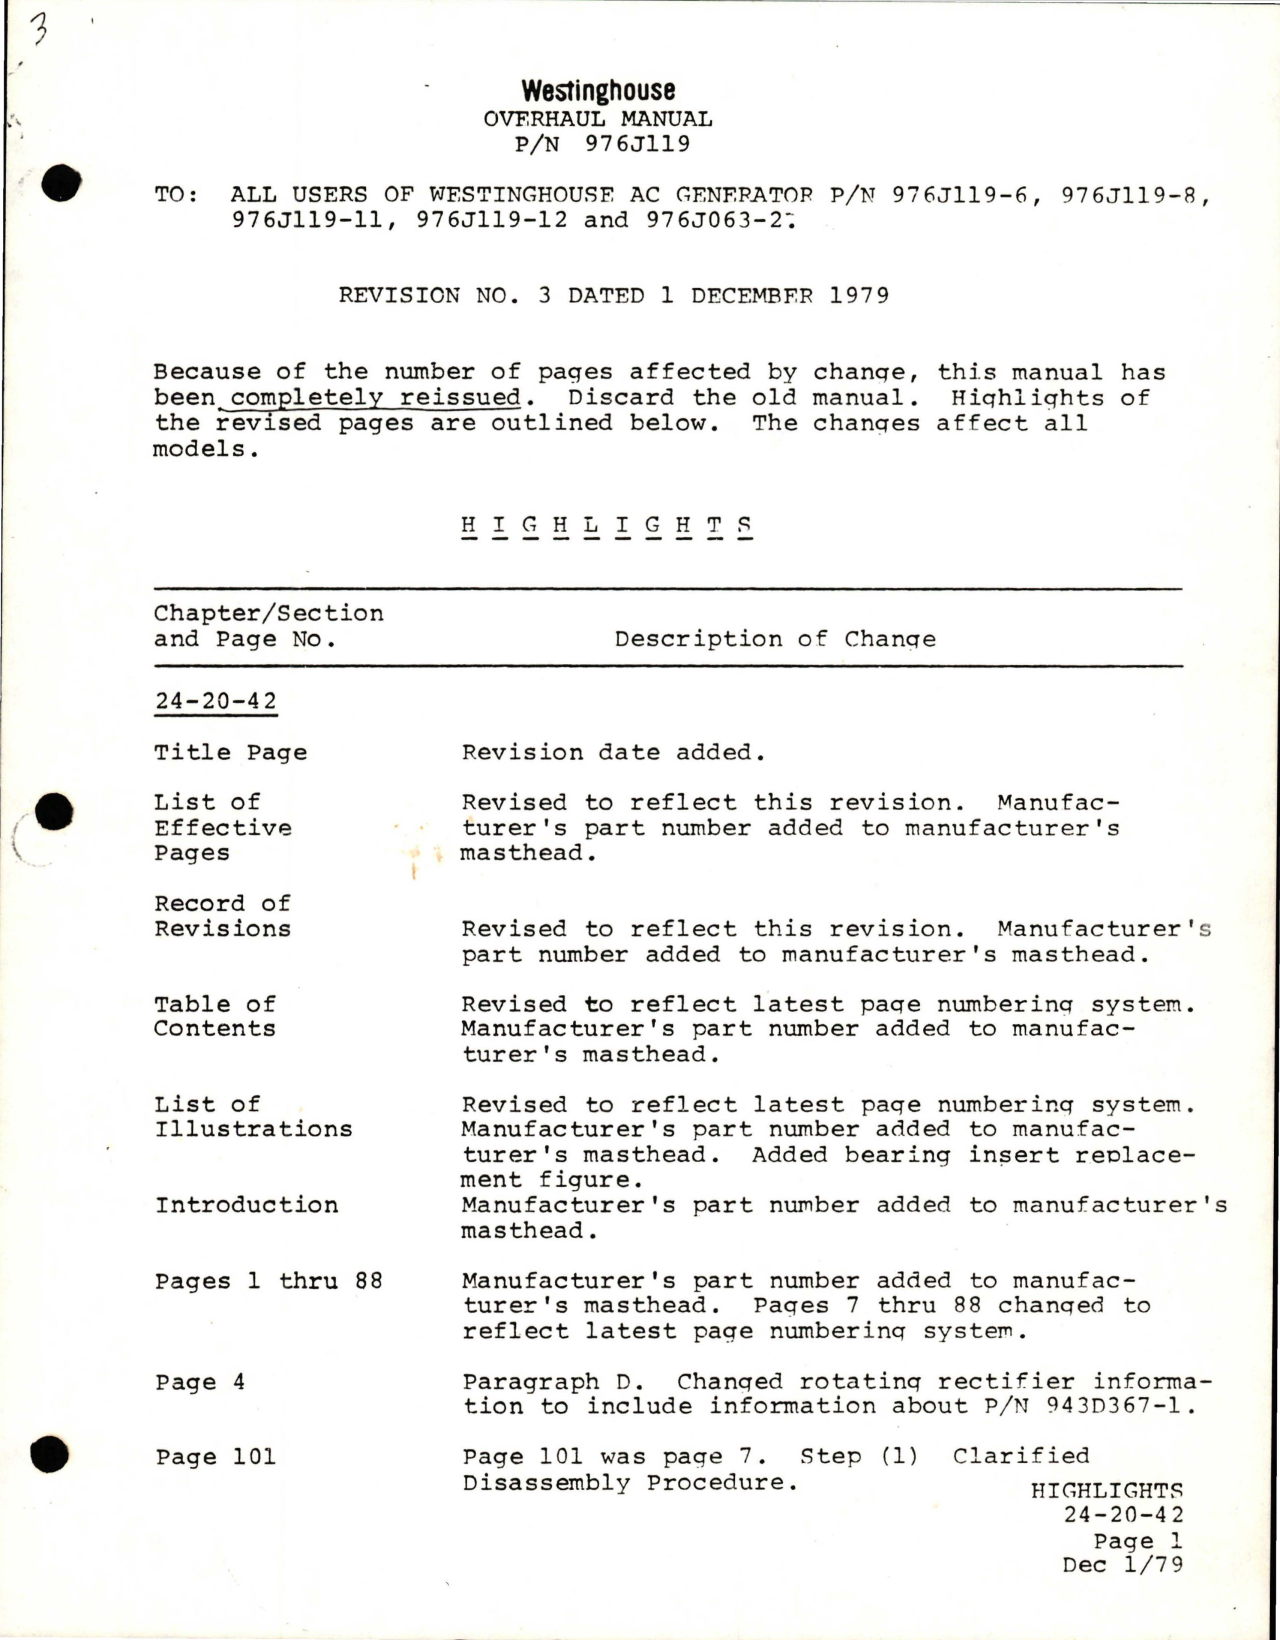 Sample page 1 from AirCorps Library document: Overhaul Manual Revision Highlights for AC Generator 